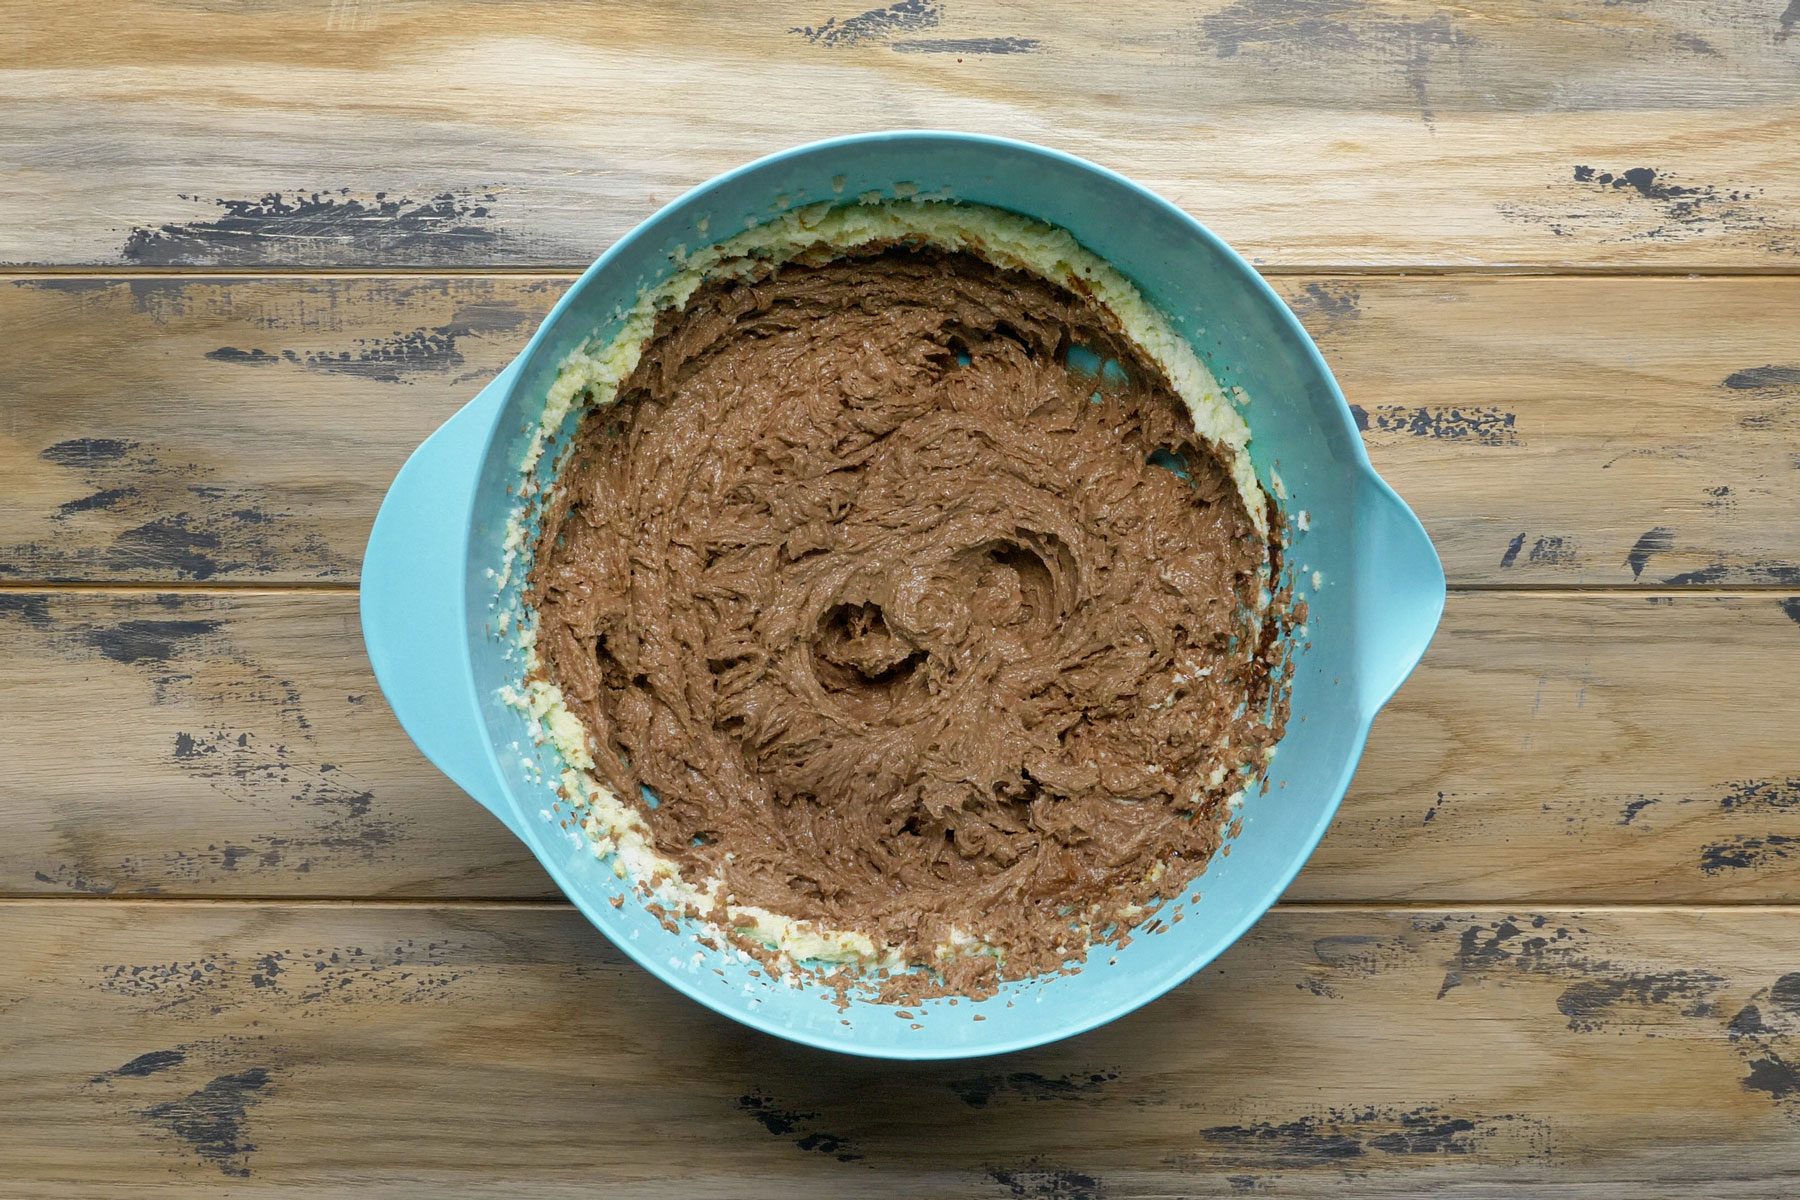 Melted chocolate mixed in a large bowl to make a cake